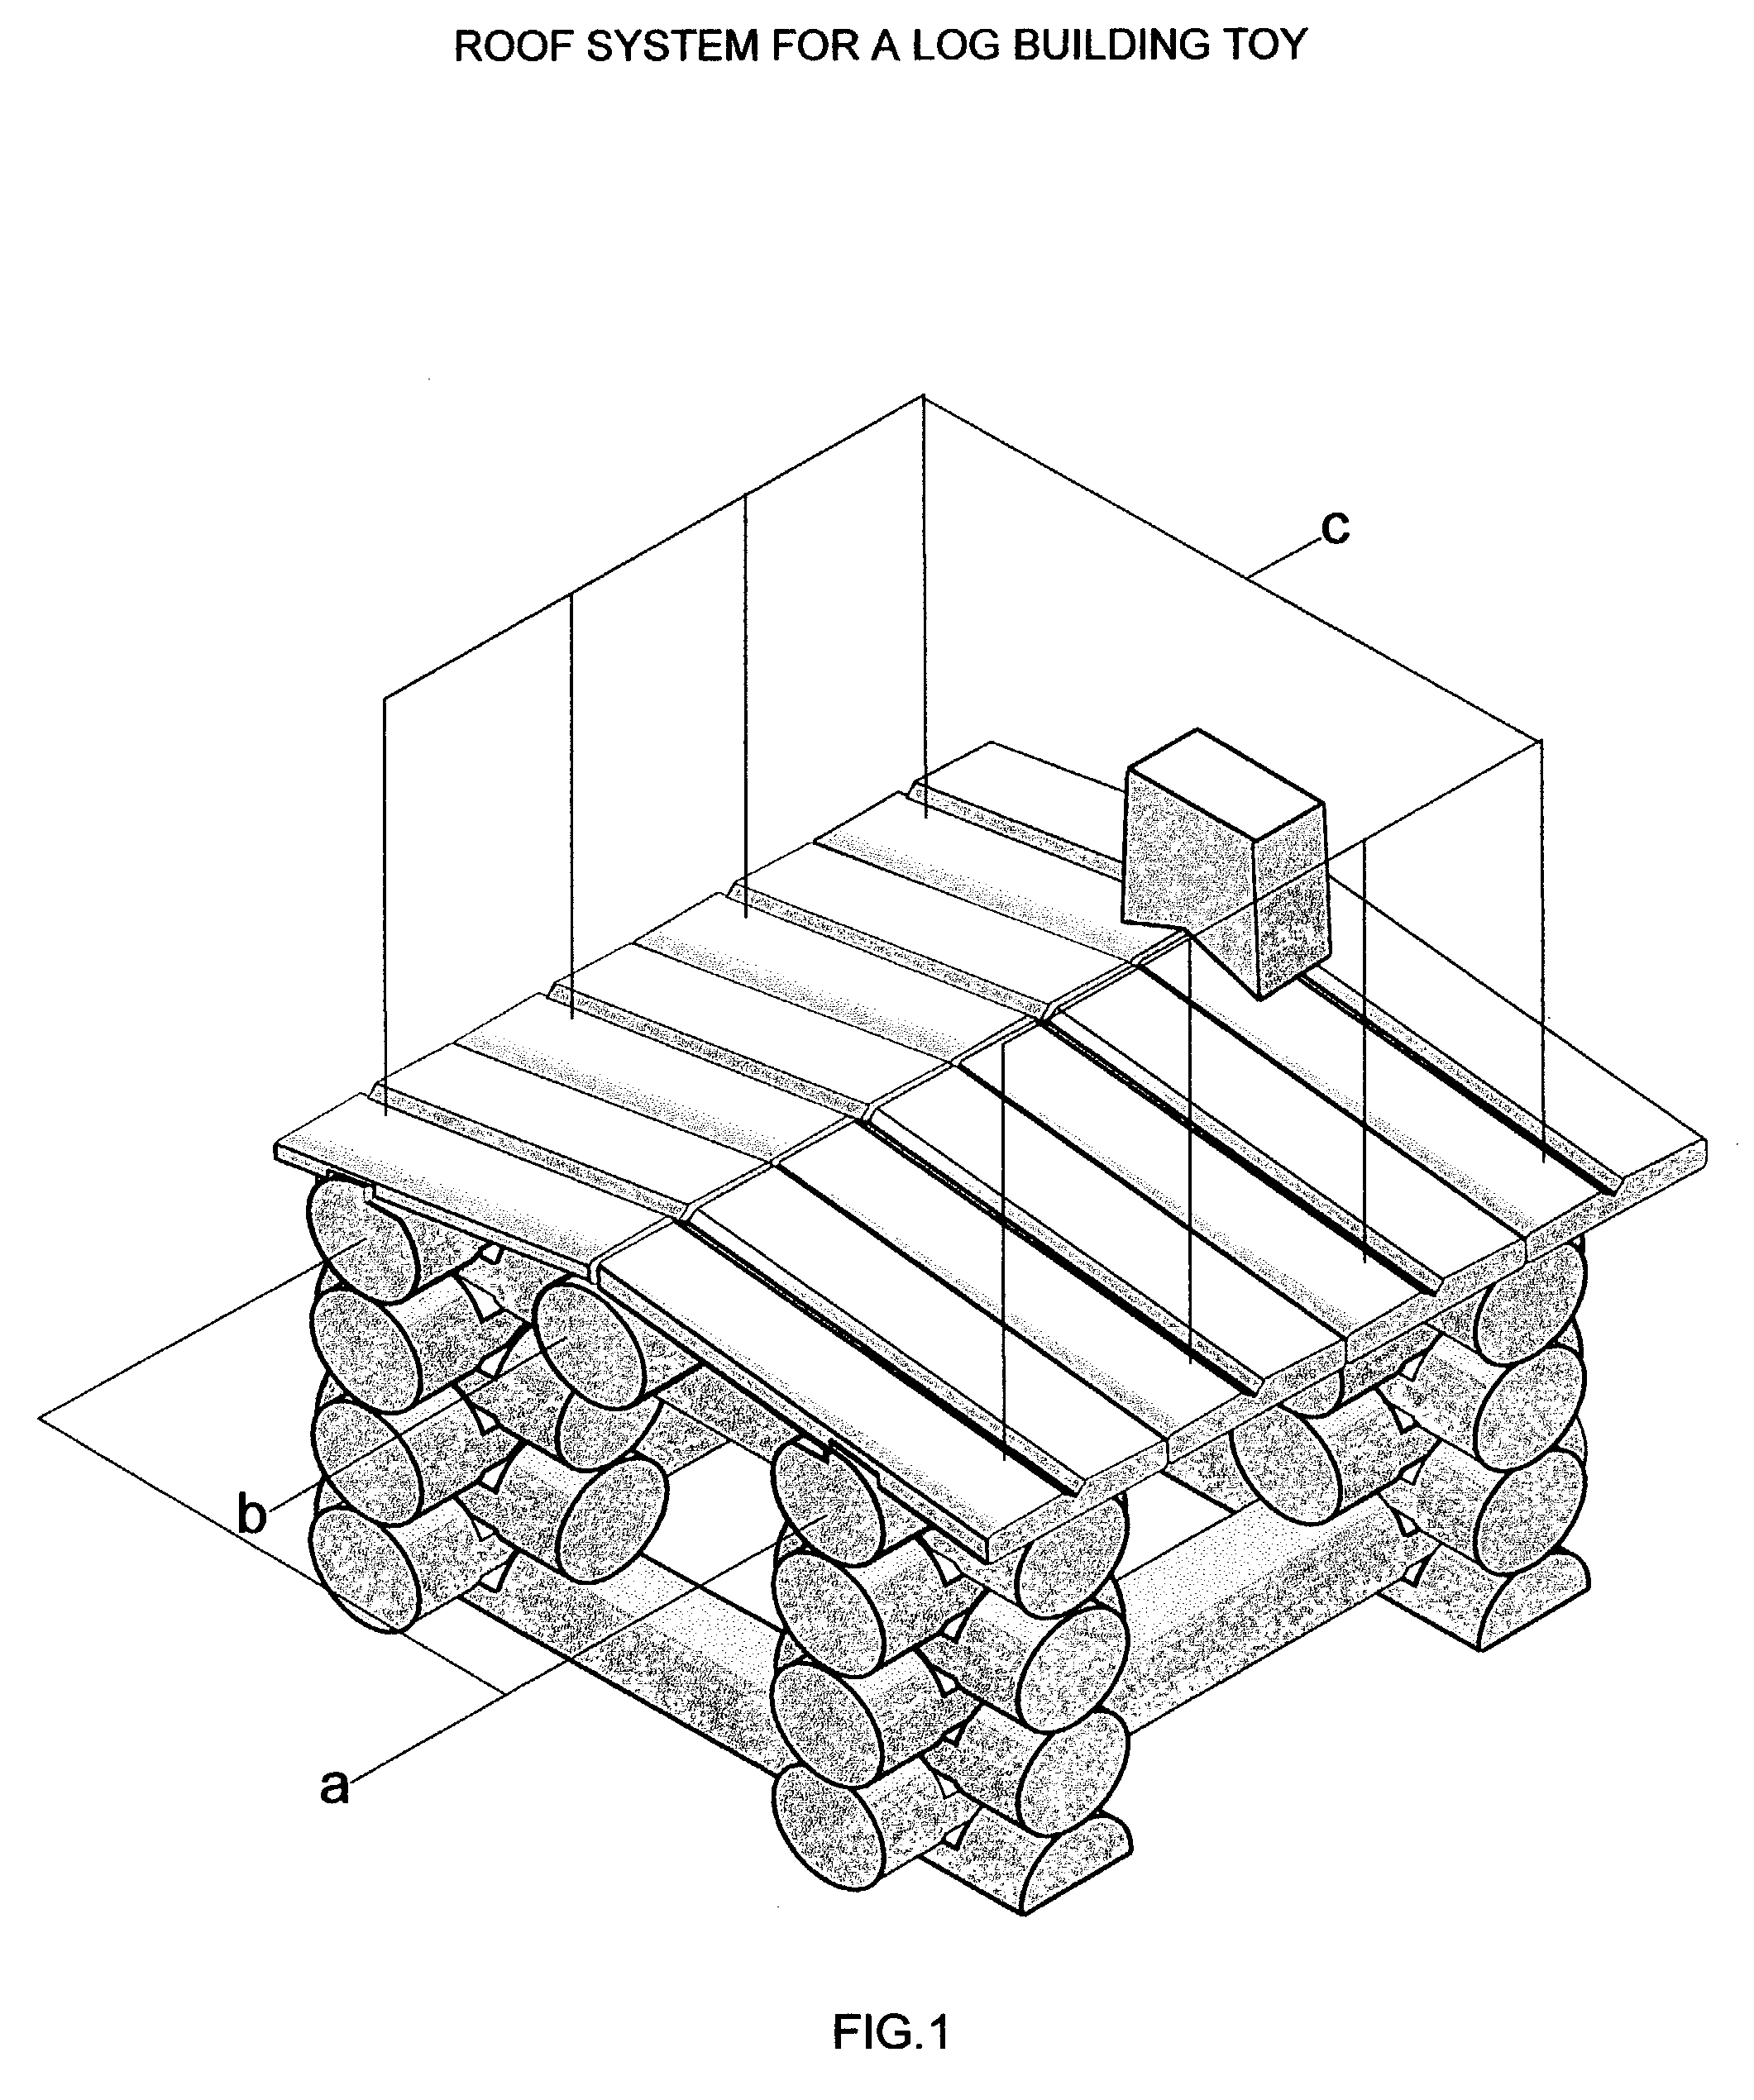 Roof system for a log building toy